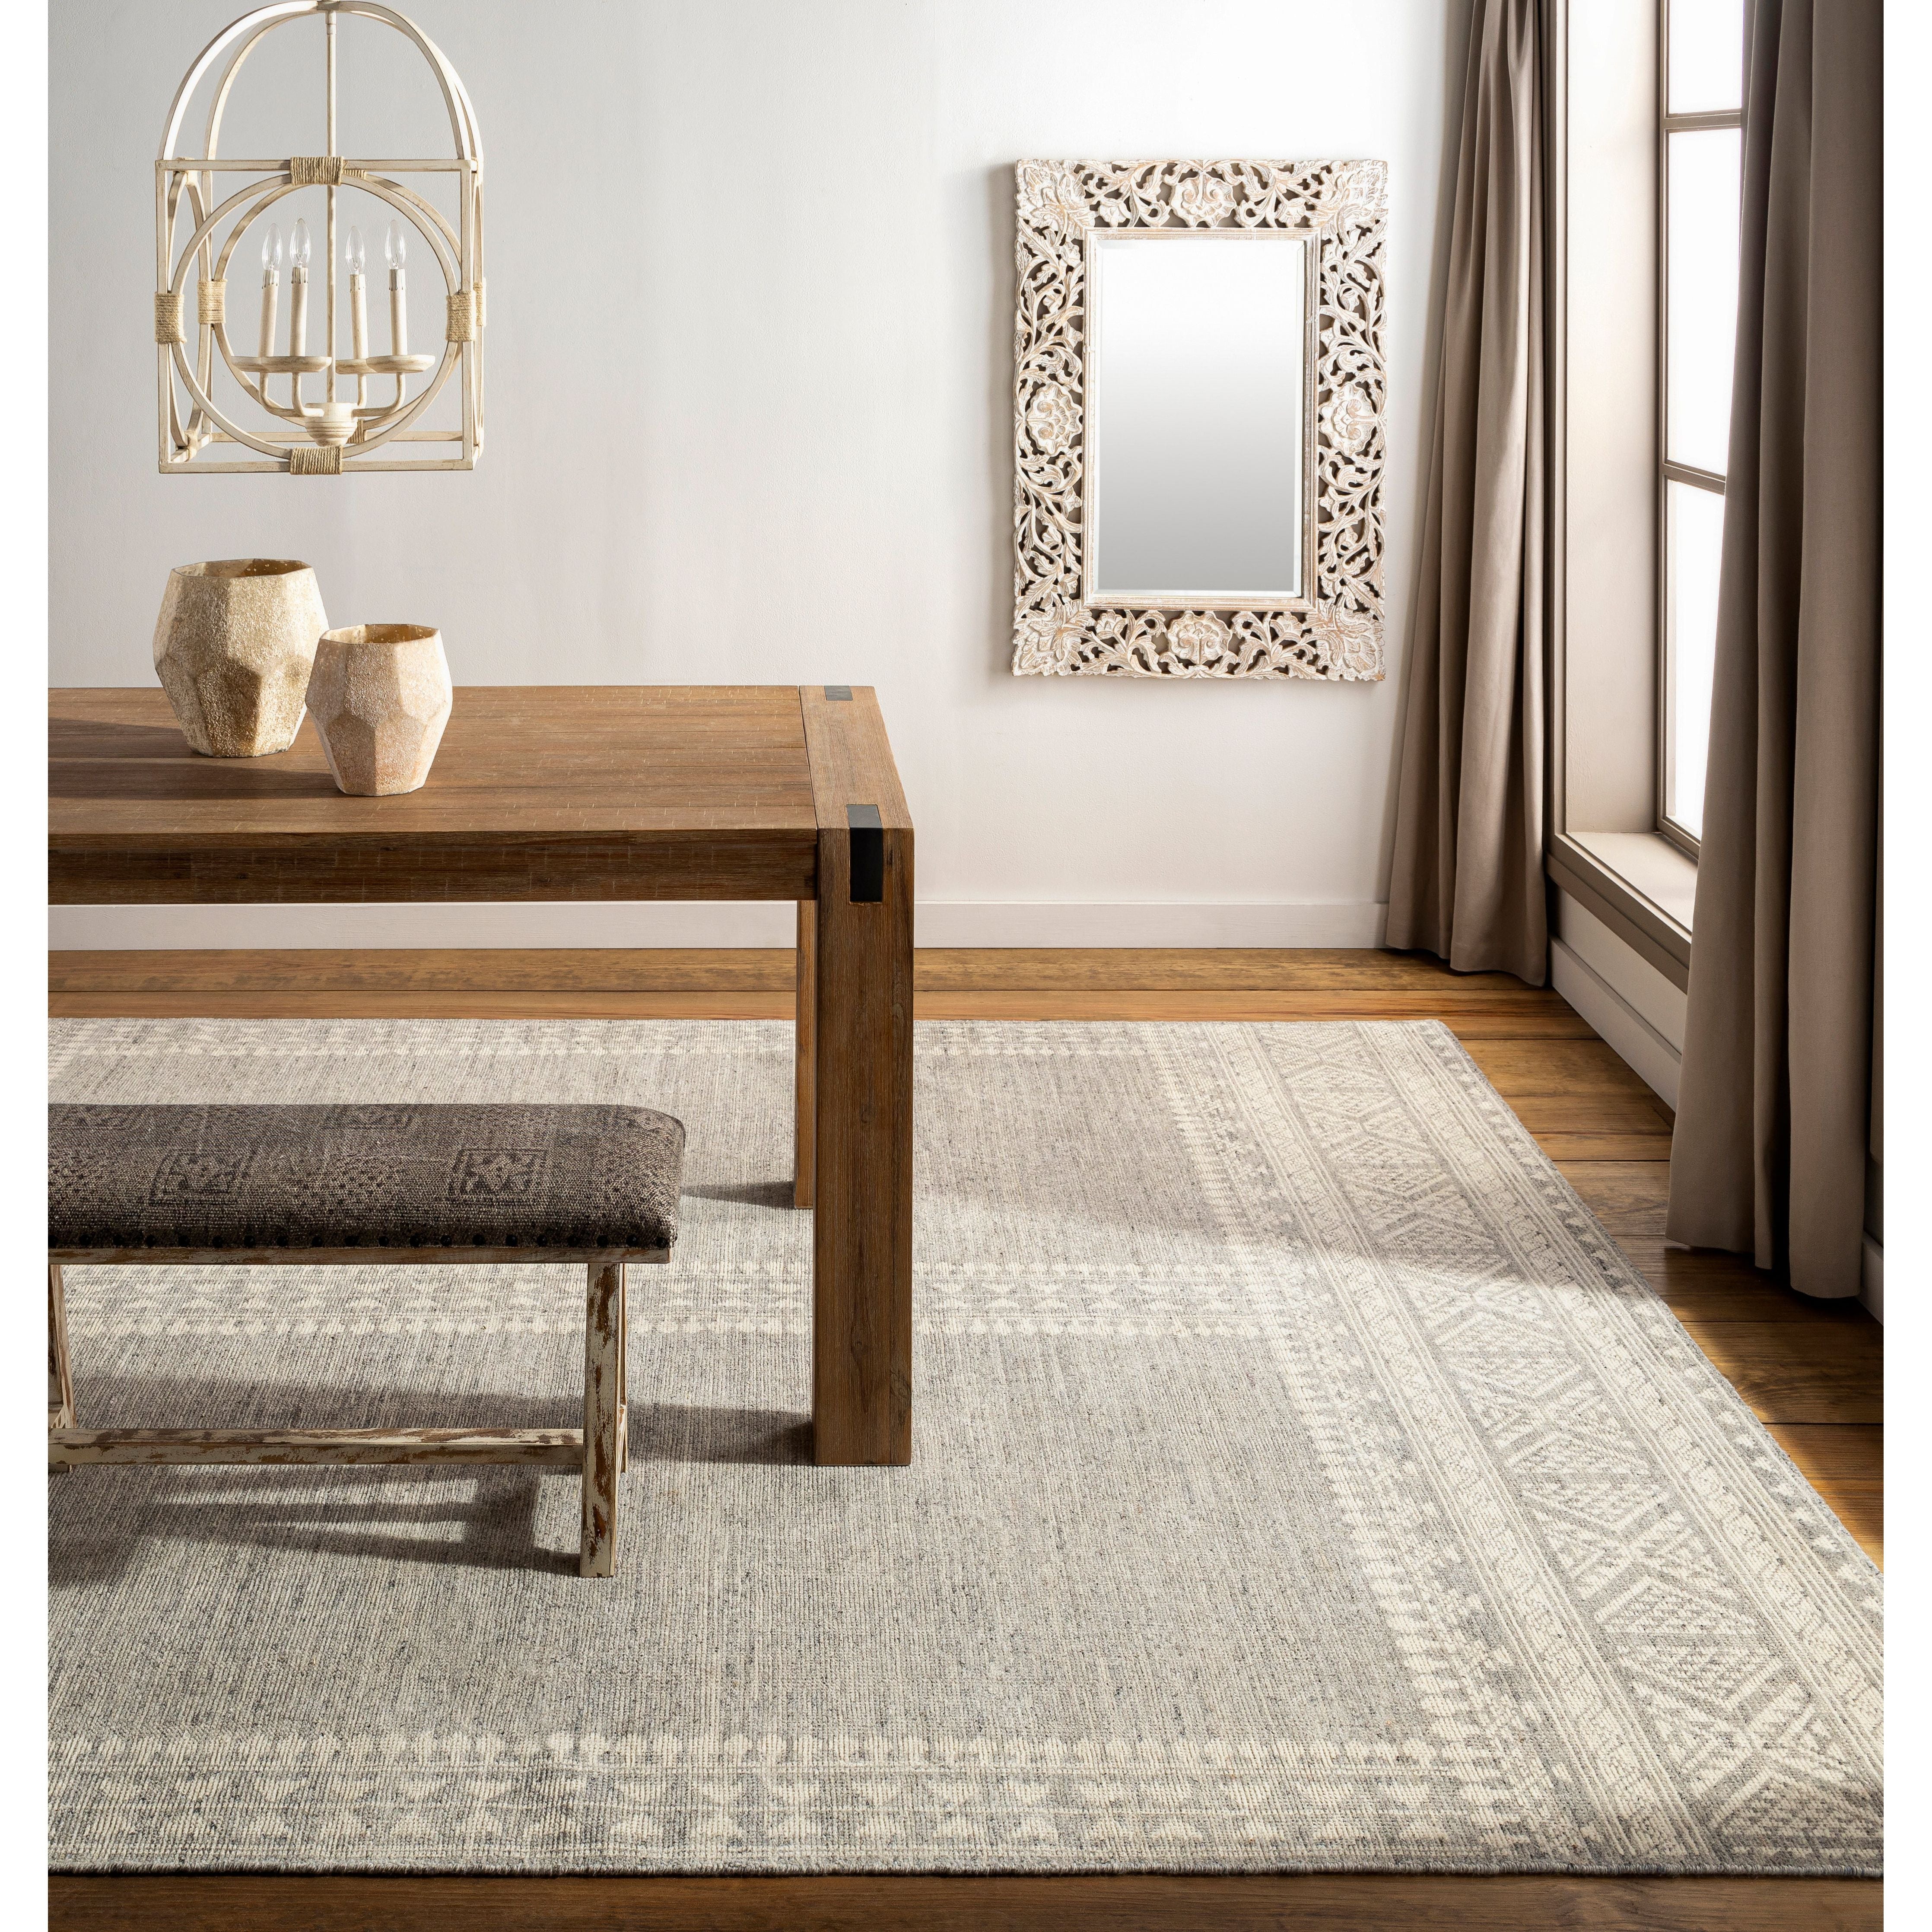 The Tunus Mirrh Rug features a globally inspired design made from New Zealand wool. The hand-knotted rug adds wabi sabi charm to any room. Amethyst Home provides interior design, new home construction design consulting, vintage area rugs, and lighting in the Charlotte metro area.